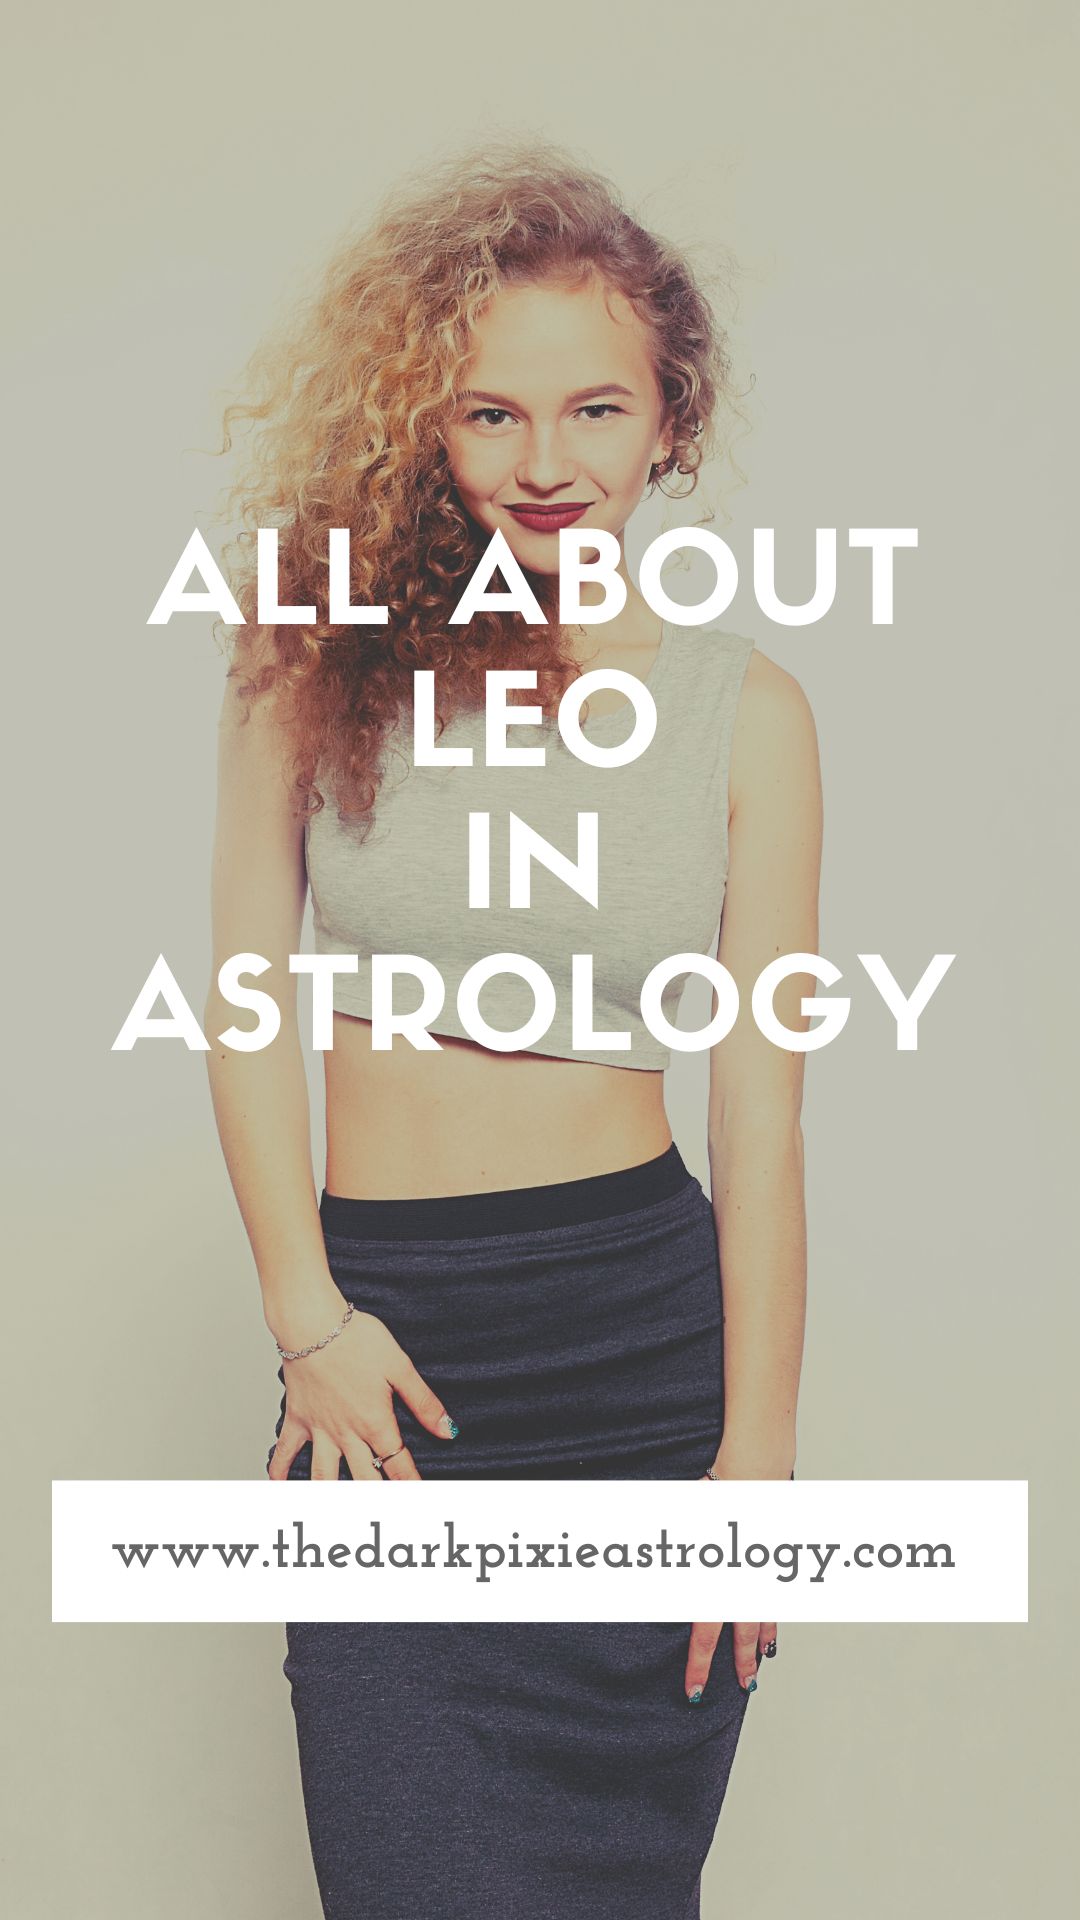 All About Leo in Astrology - The Dark Pixie Astrology